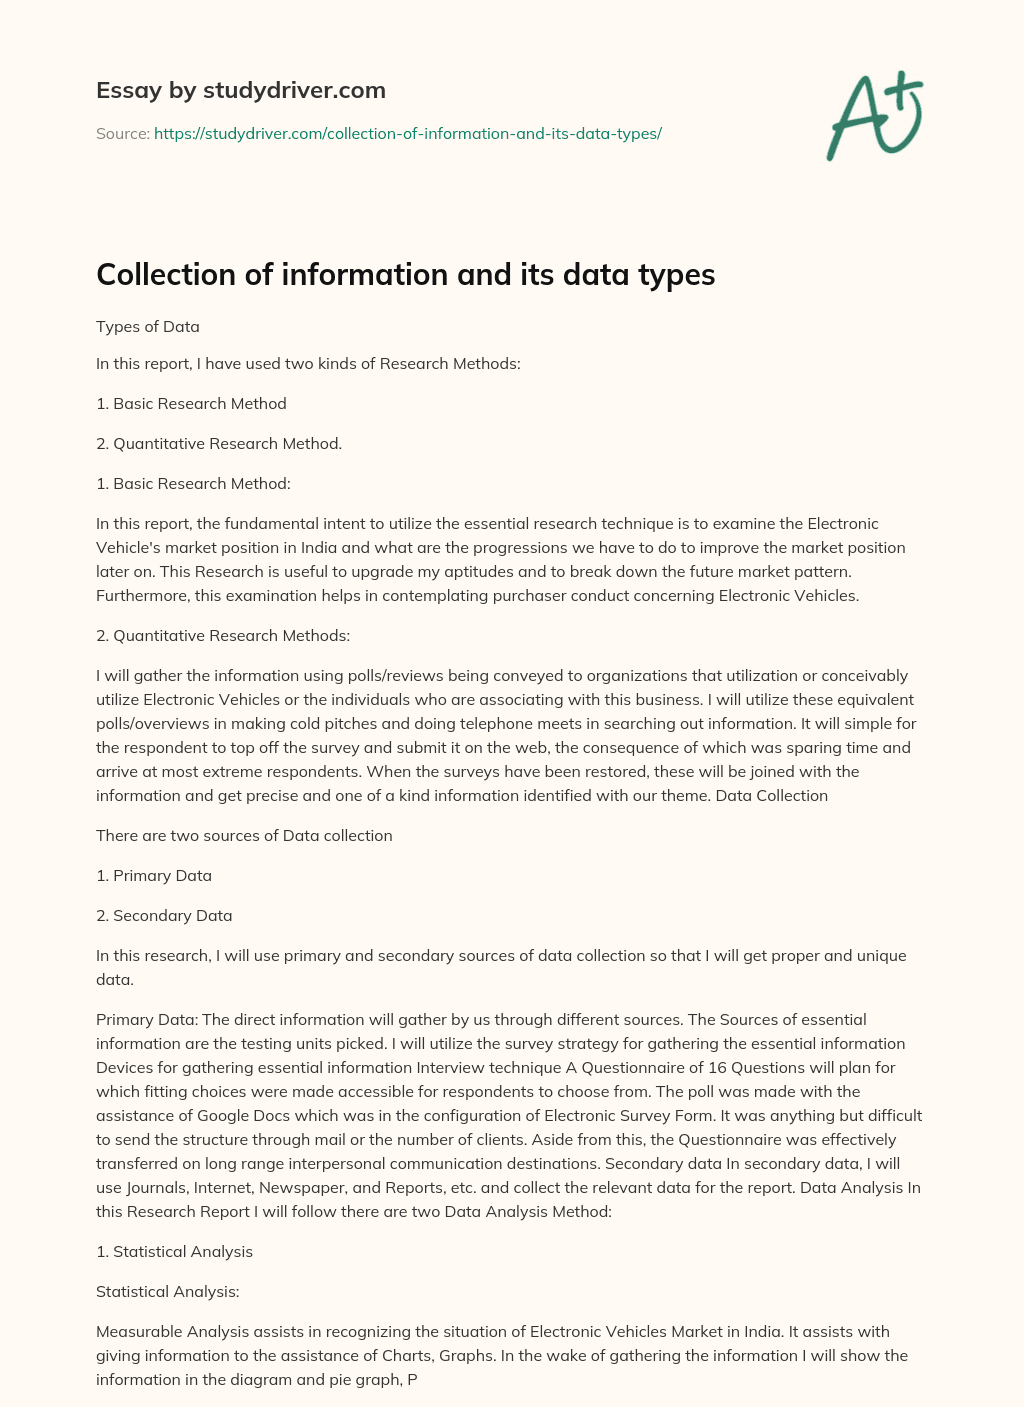 Collection of Information and its Data Types essay